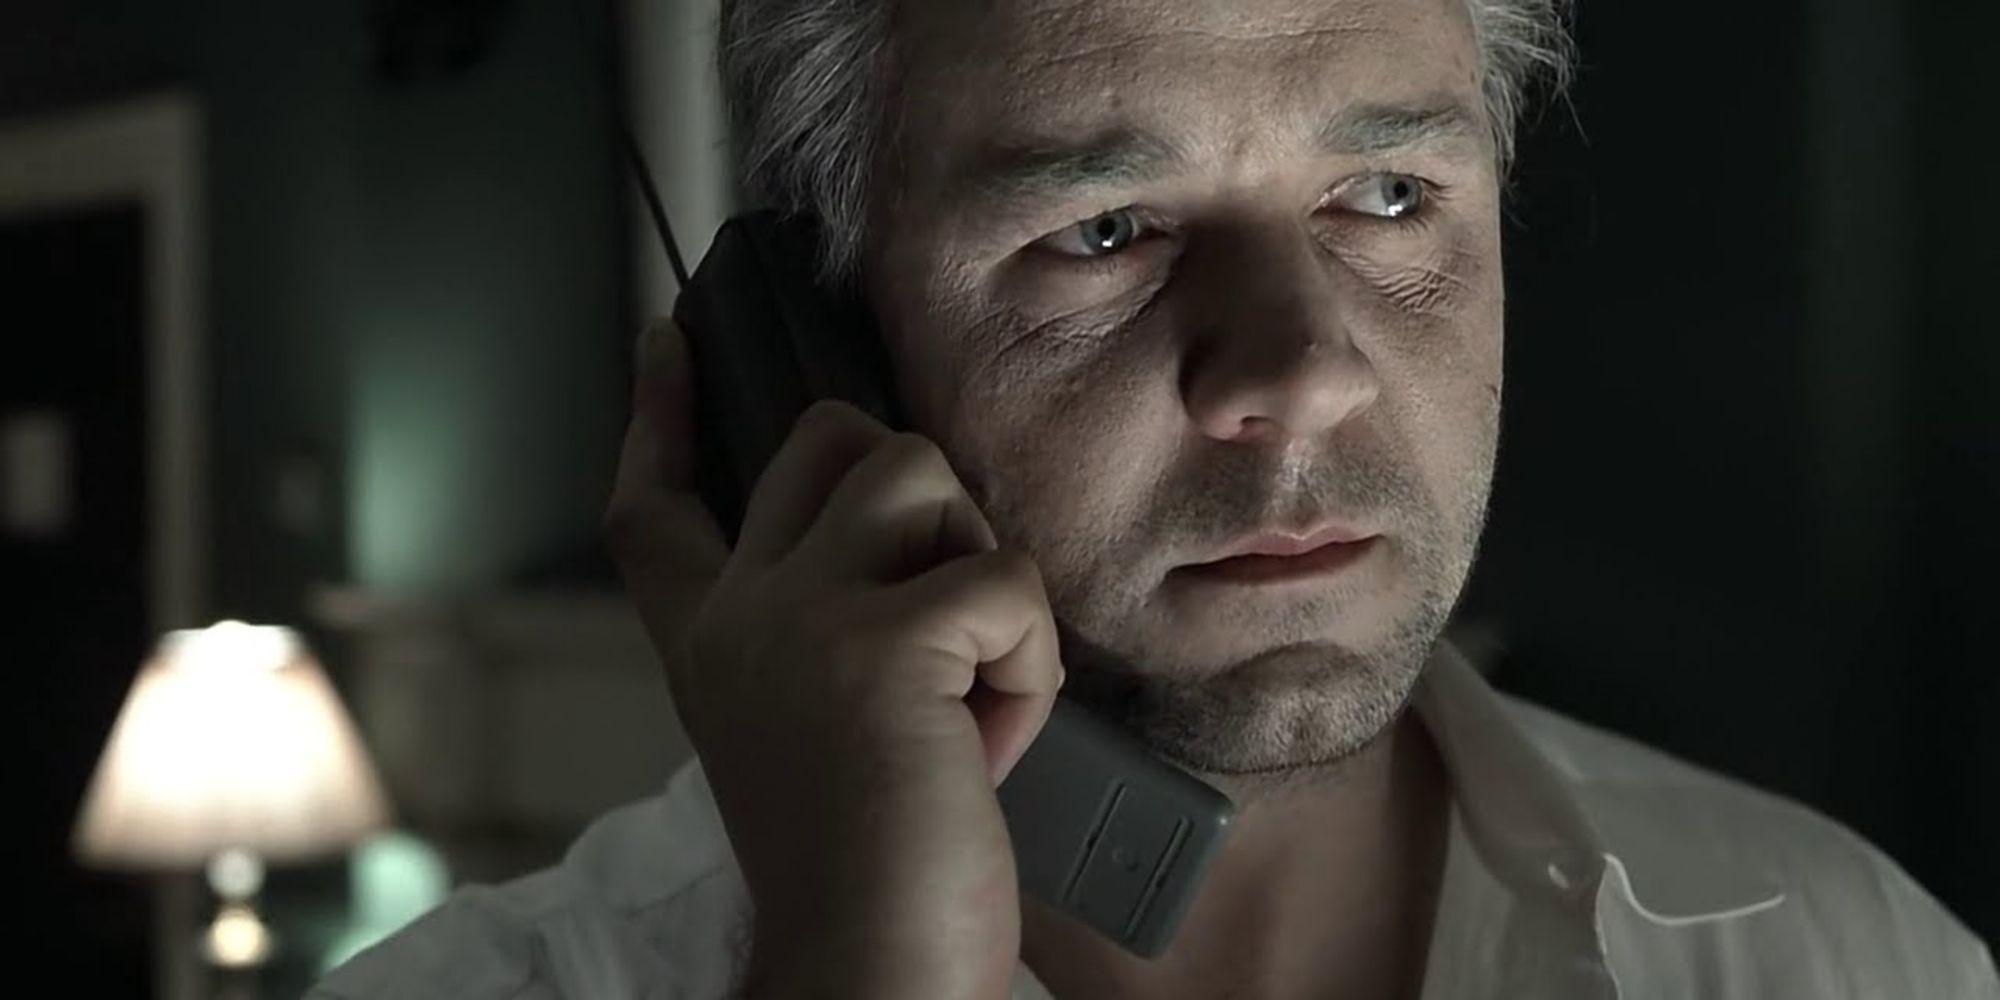 Russell Crowe with cellphone against his face in The Insider